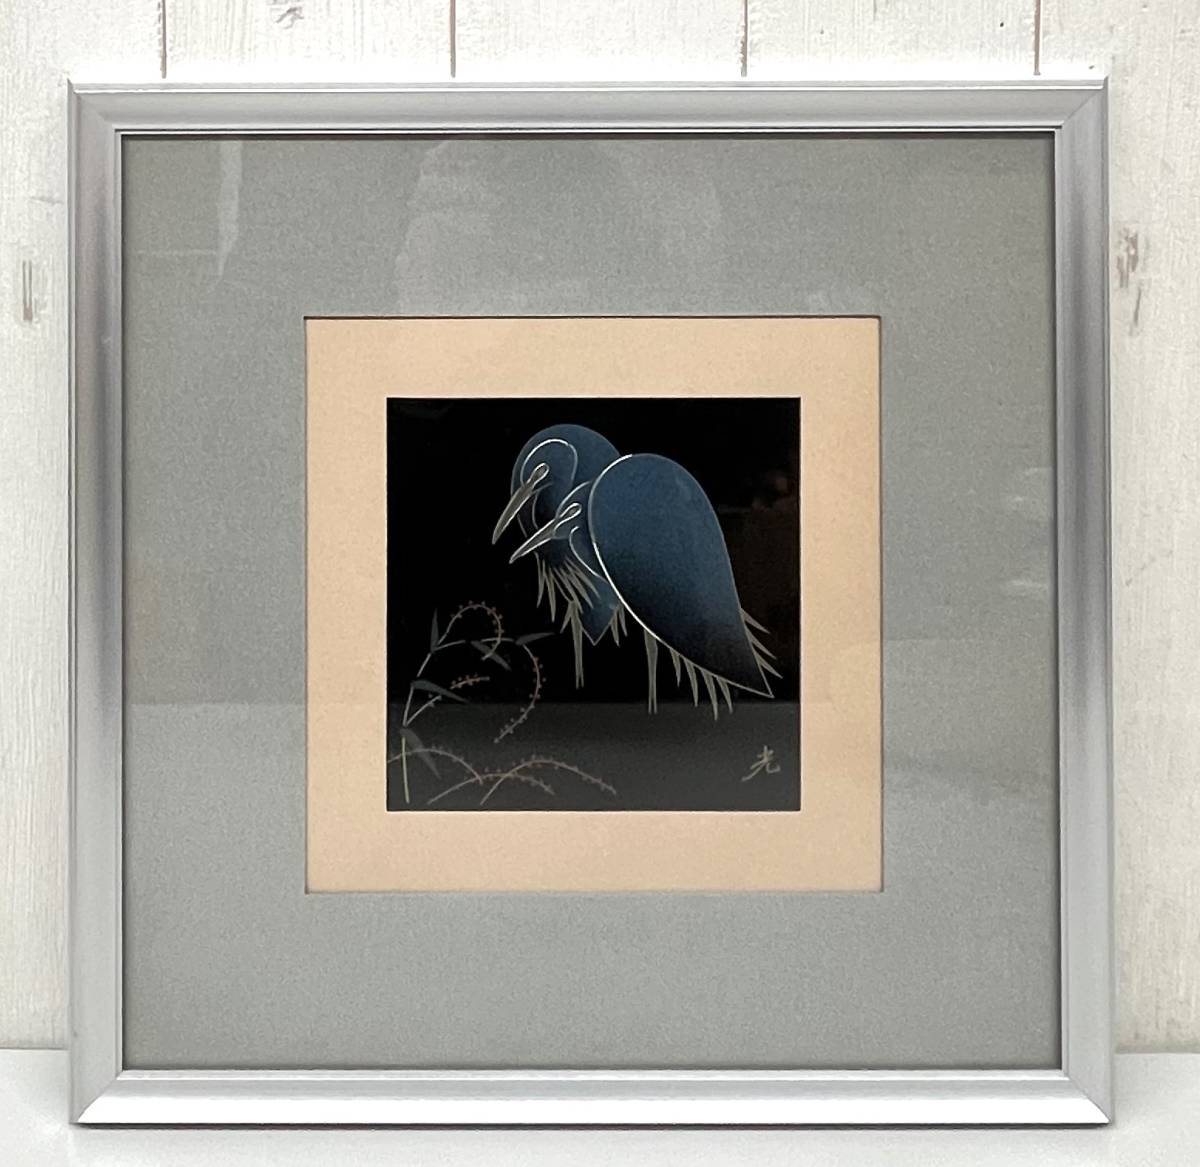 RETRO Retro Collection *Light Inscribed Heron Illustration Two Birds Botanical Painting Gold Metal Carving Framed Picture Art Relief Panel Wall Hanging Interior Antique, artwork, painting, others